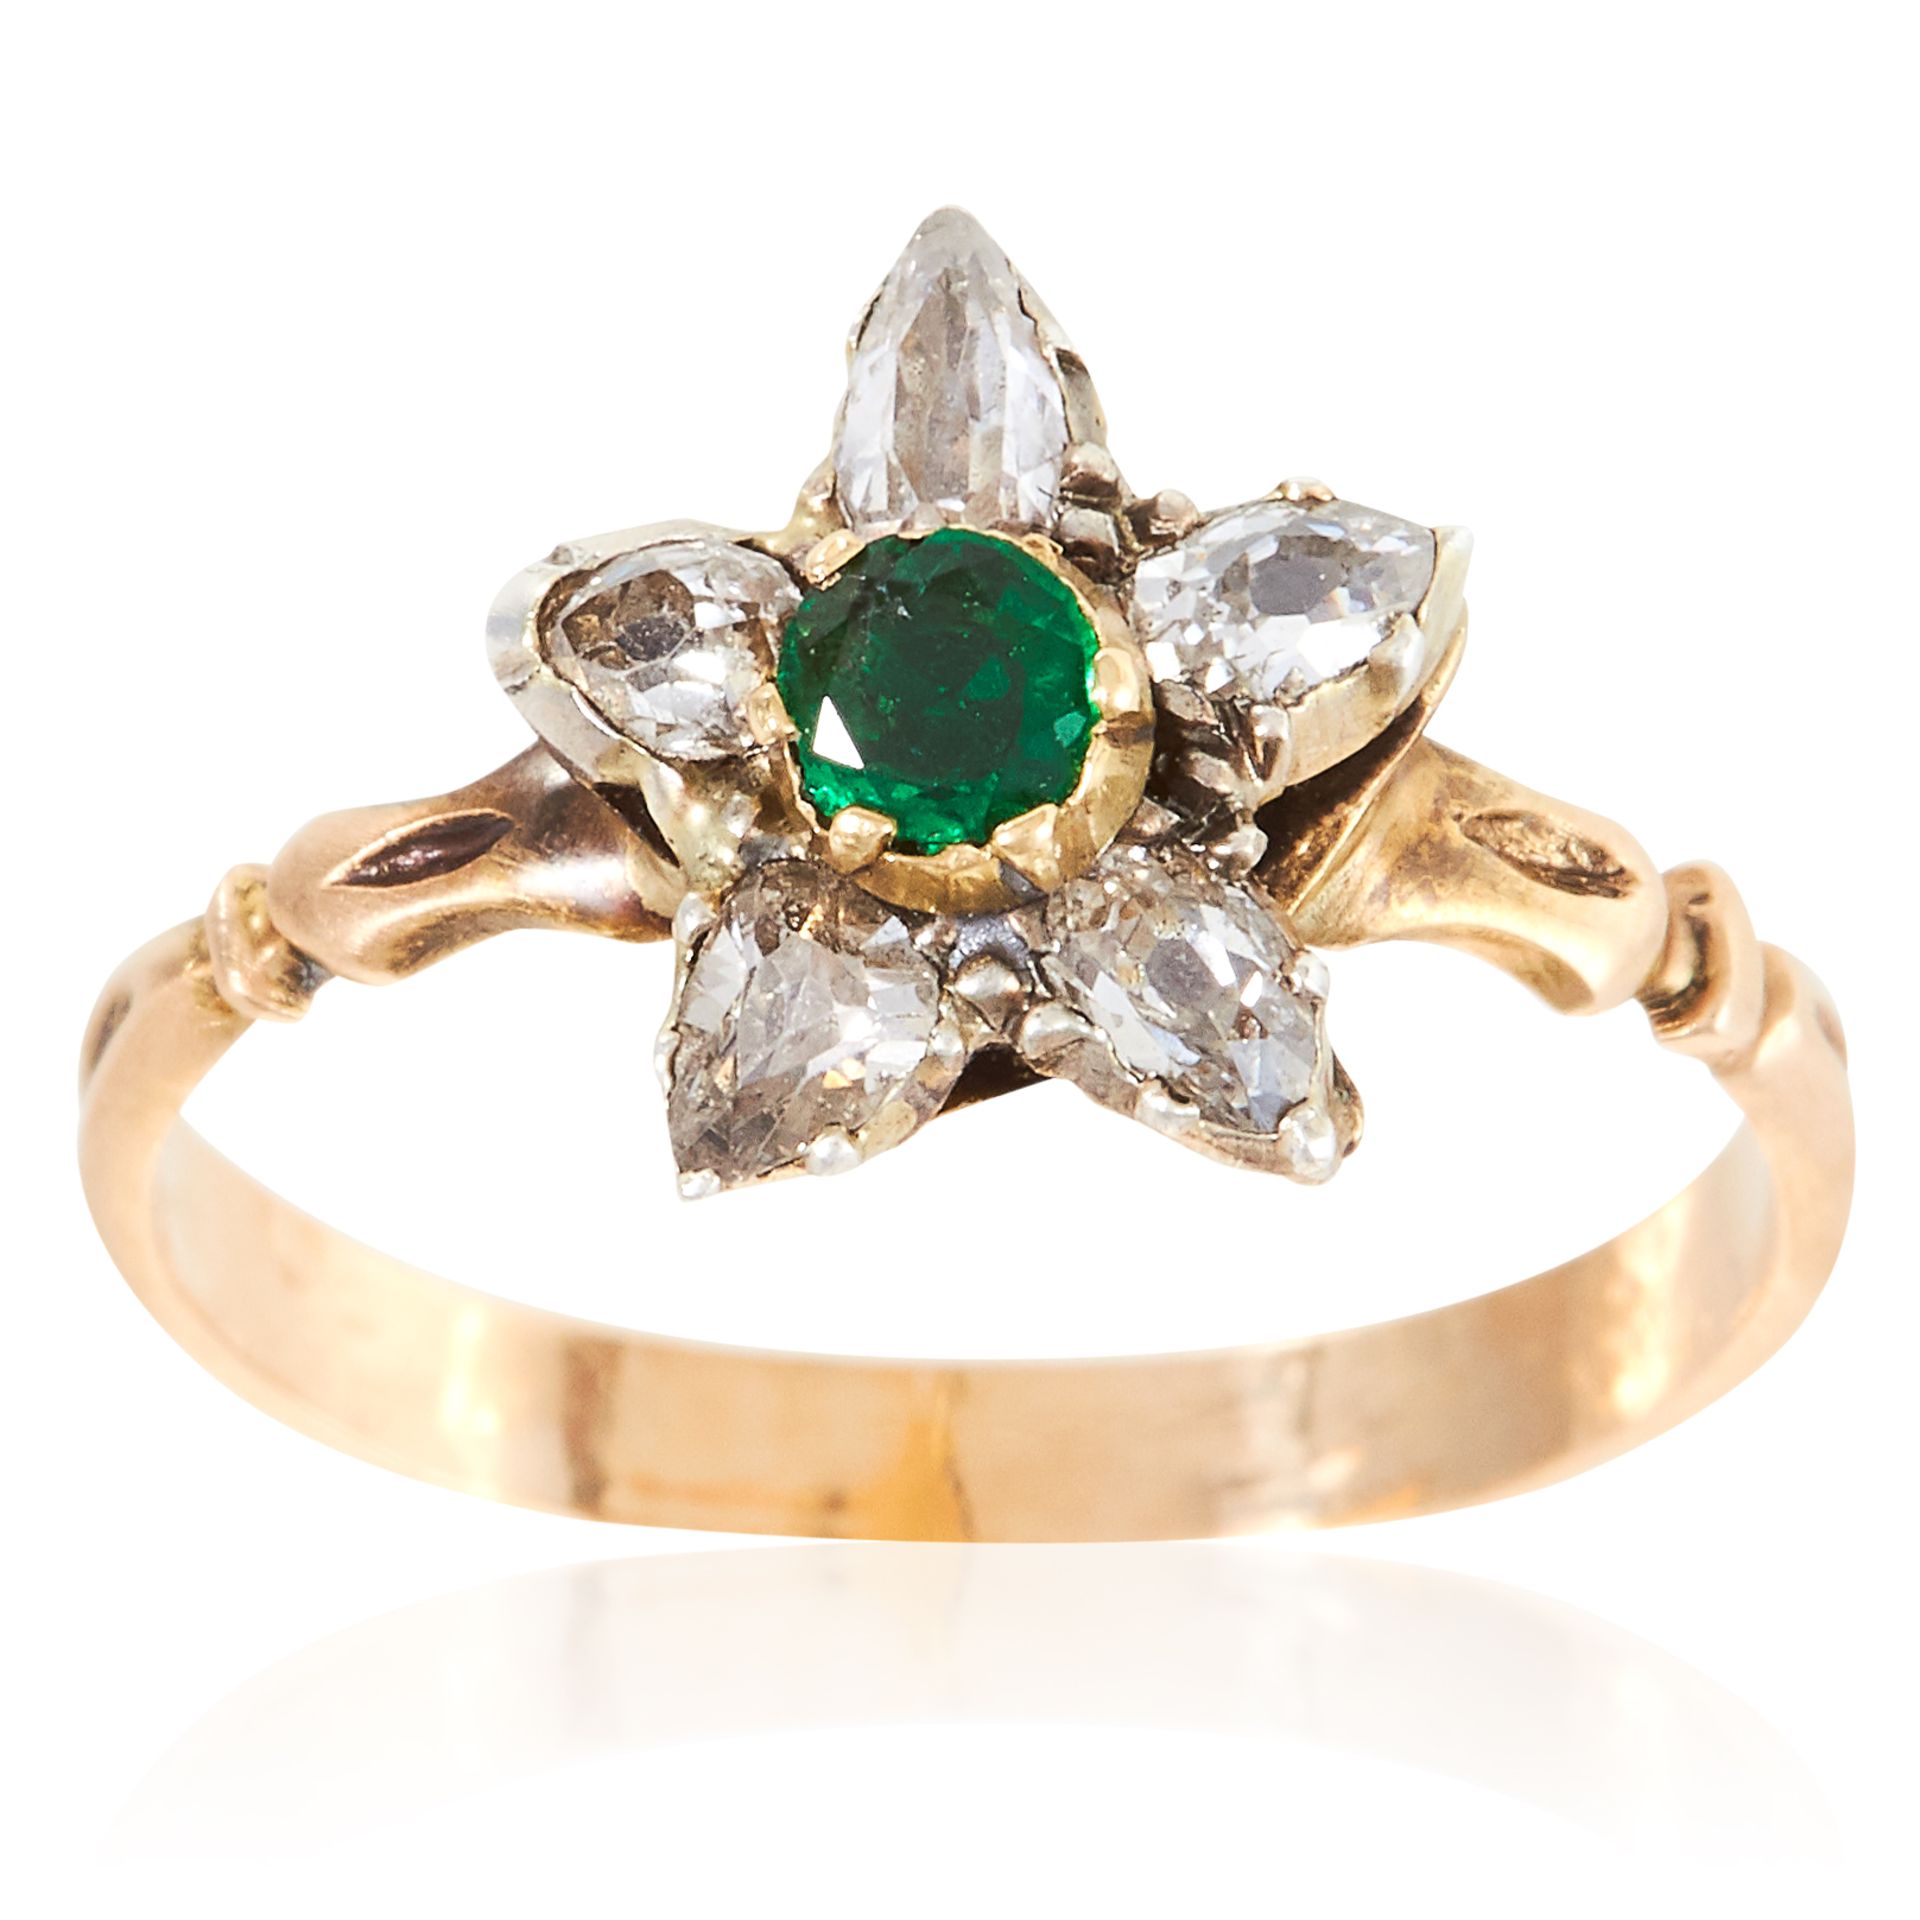 AN ANTIQUE EMERALD AND DIAMOND RING in high carat yellow gold, depicting a flower set with a round